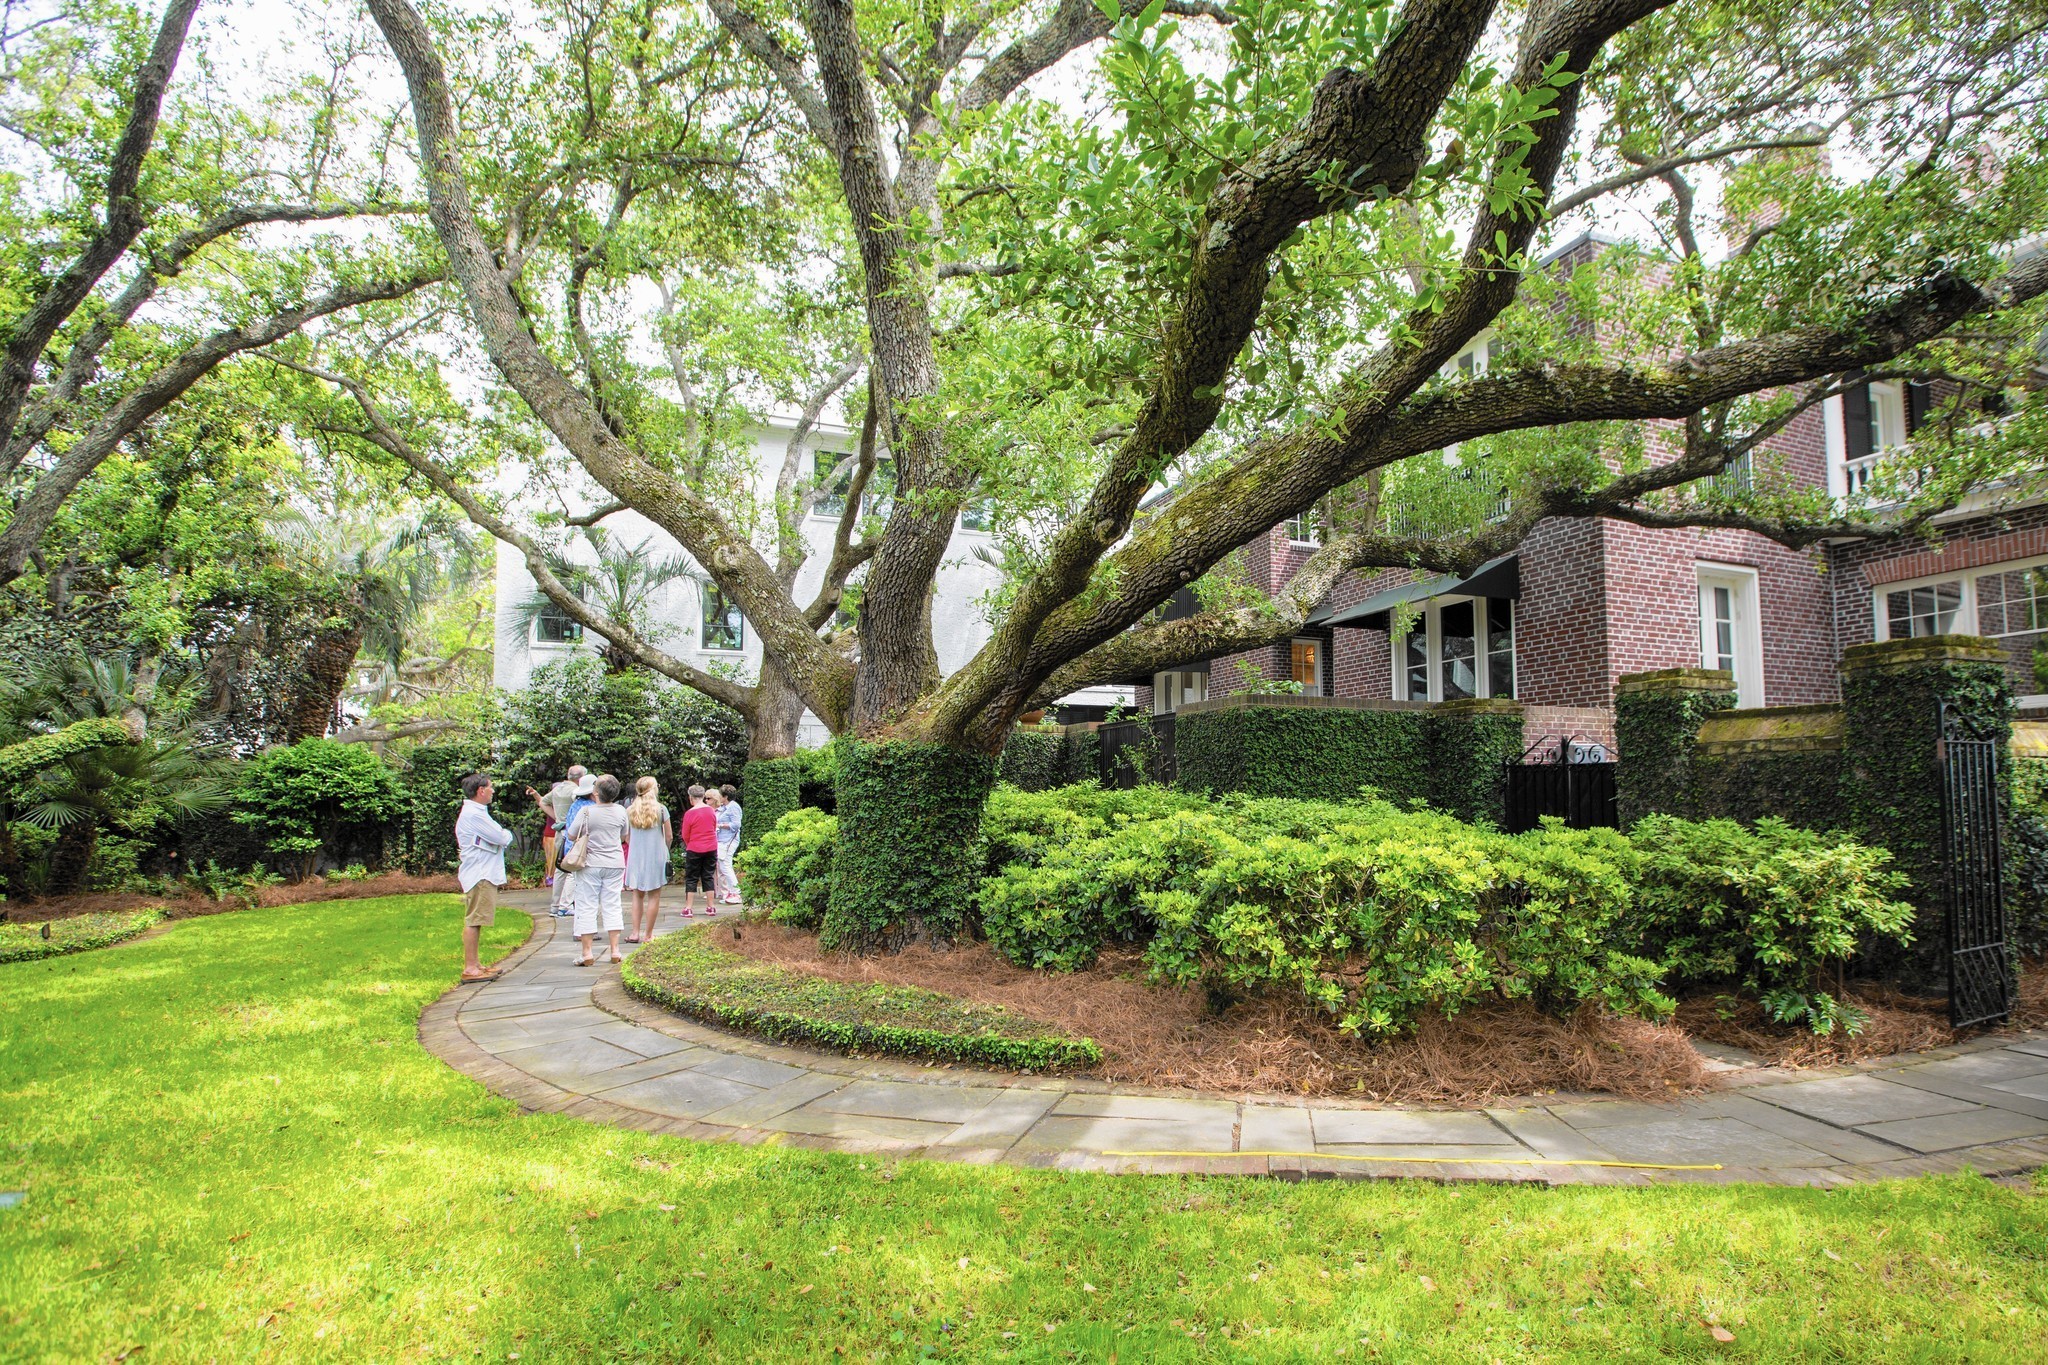 Visit Charleston in the spring for blooming festival and food scene